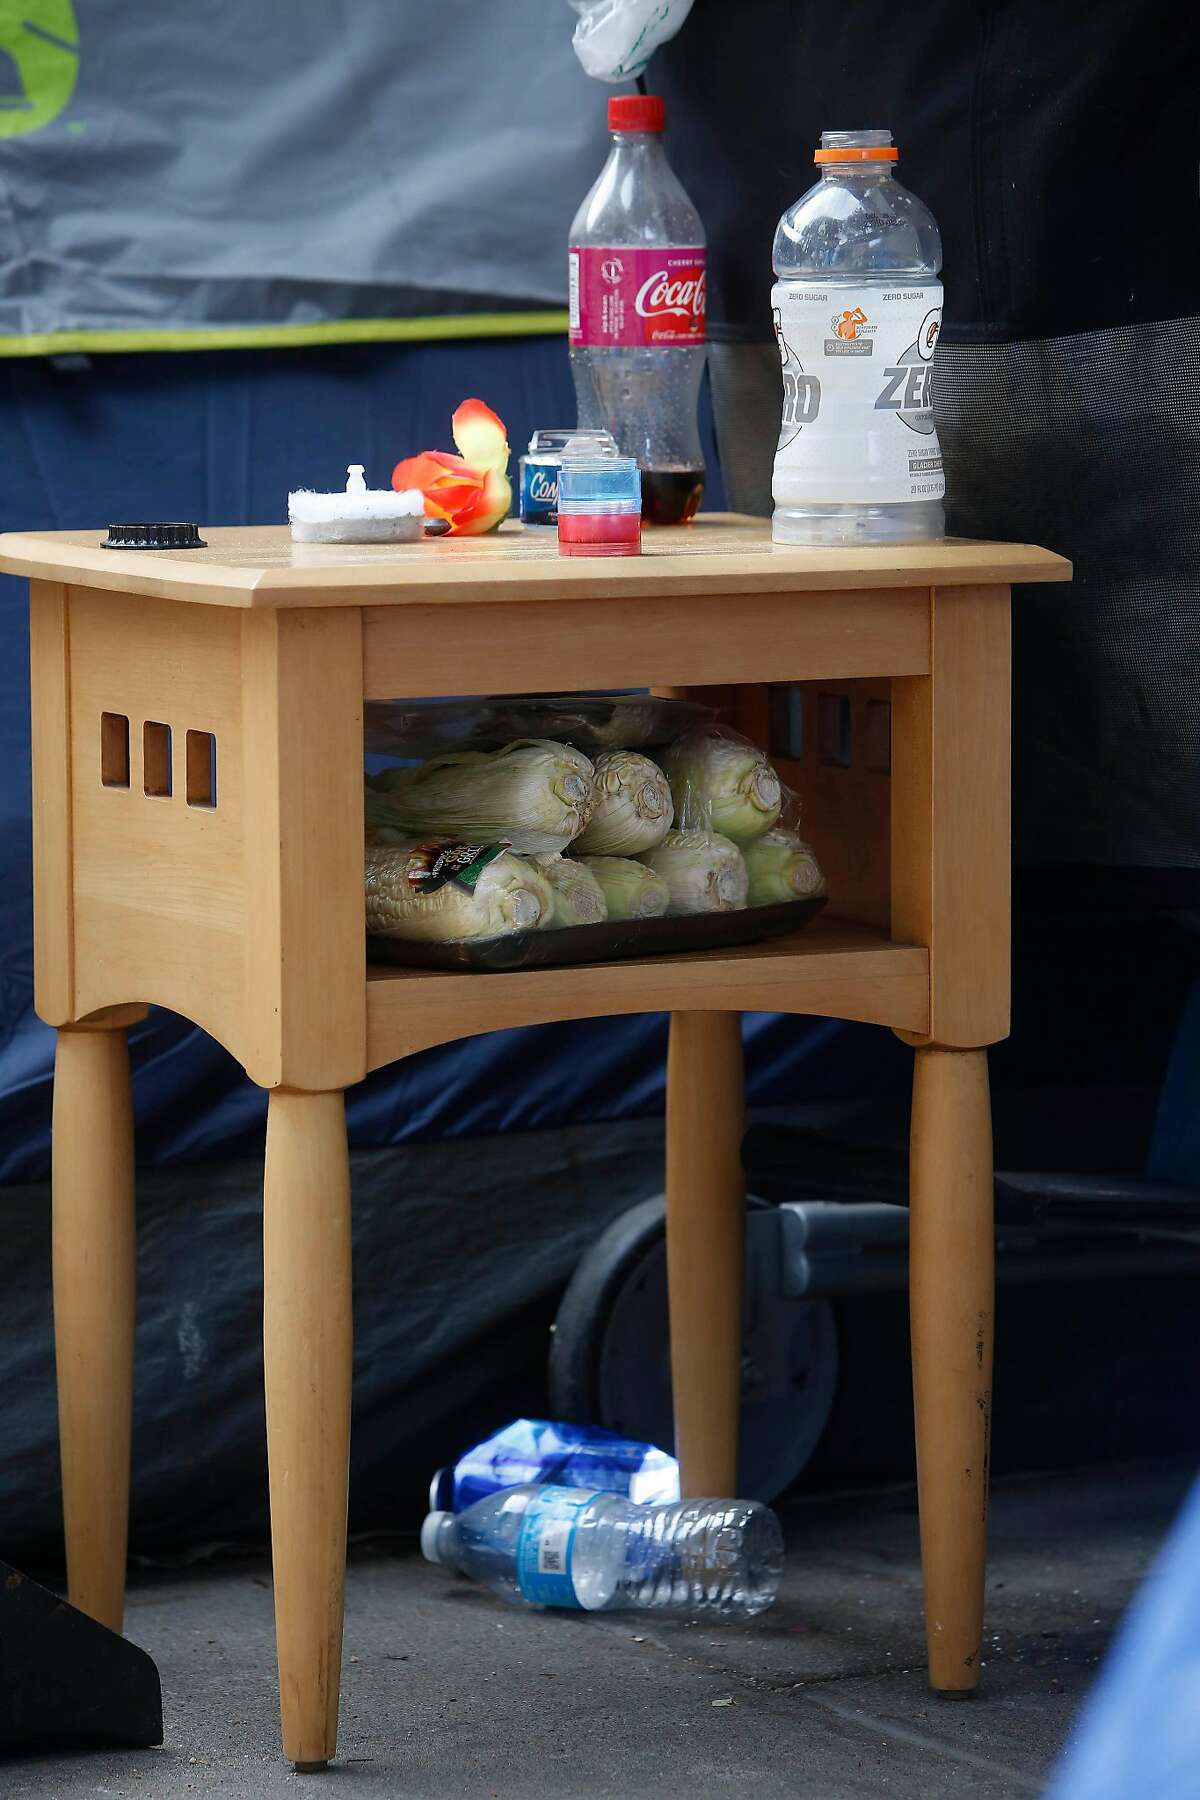 A side table next to a tent is seen with corn stored inside it and empty bottles and other items on top of it on Larch Street on Monday, June 15, 2020 in San Francisco, Calif.